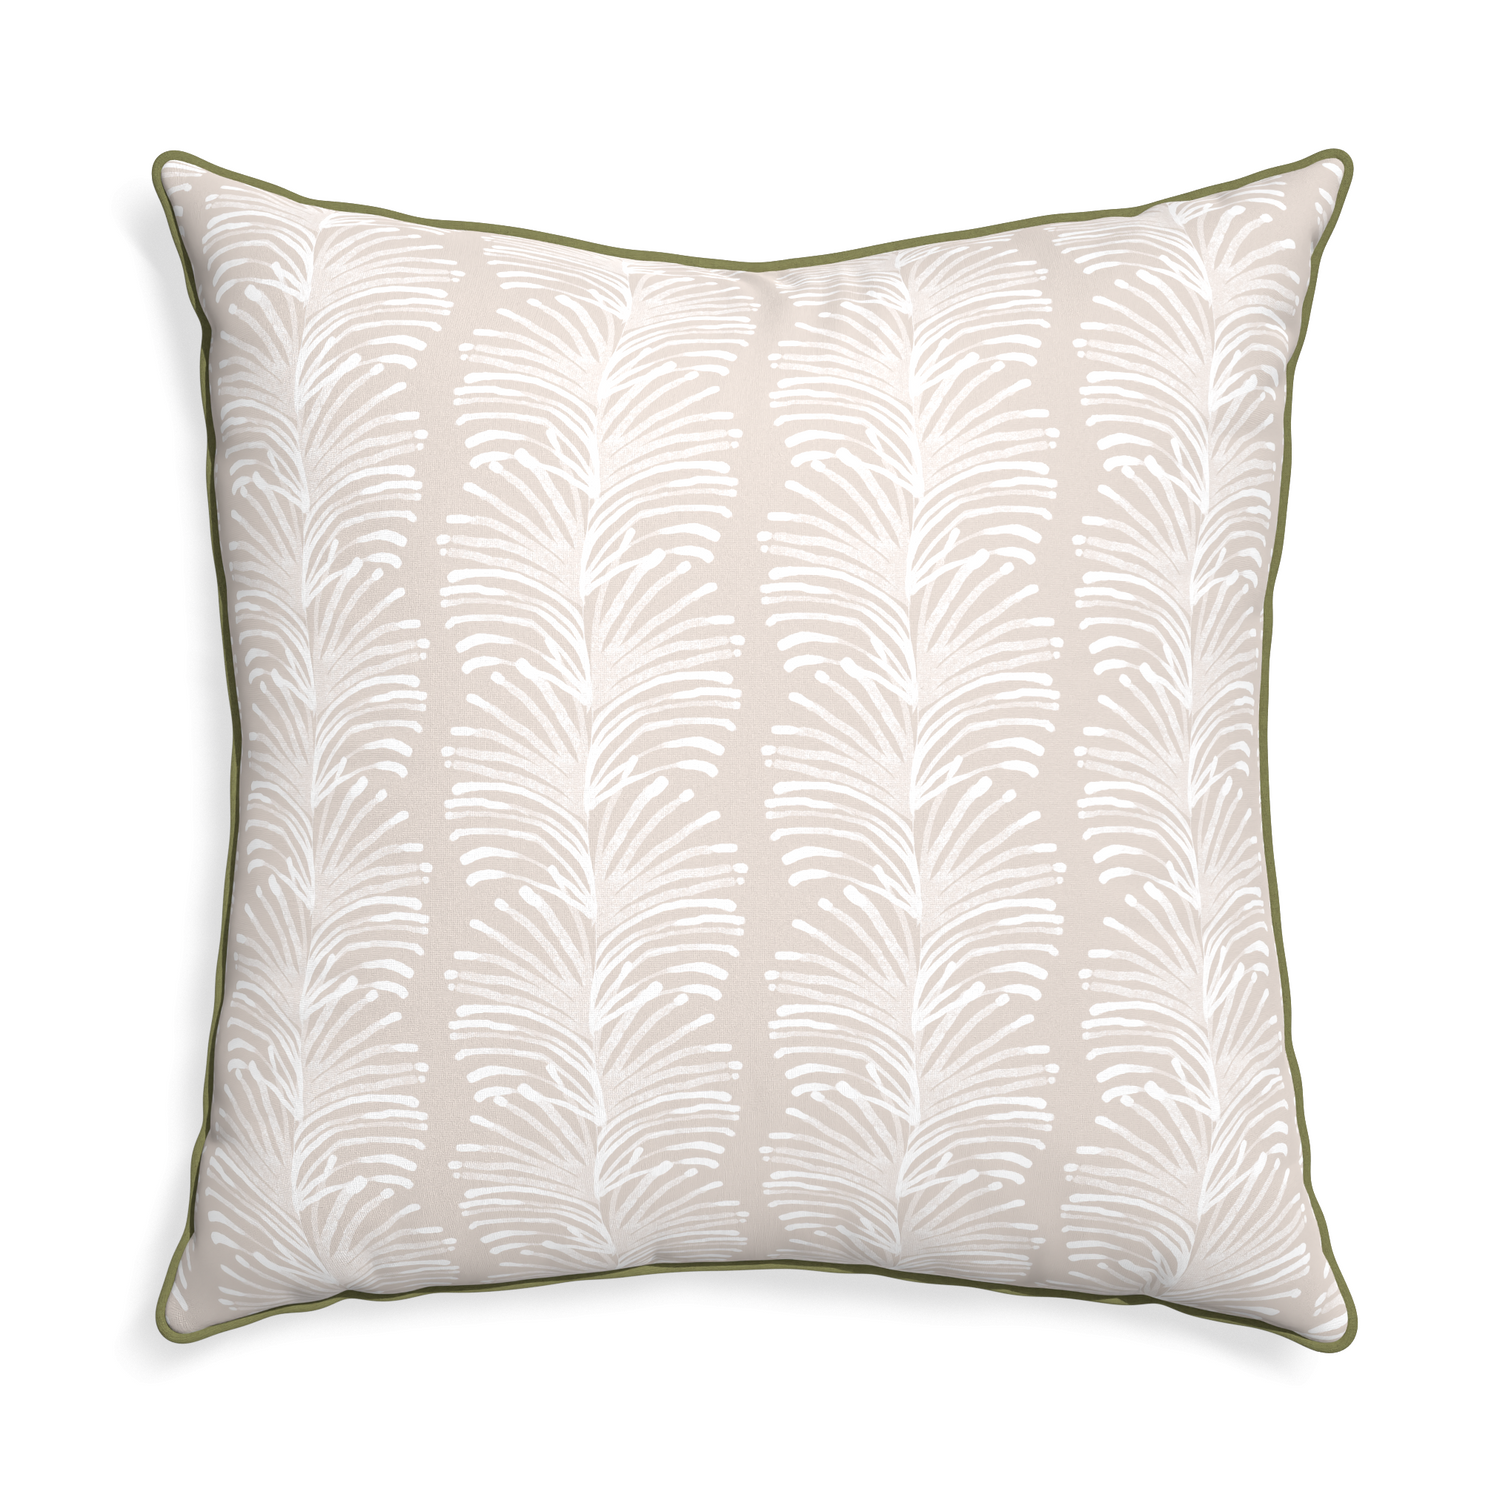 Euro-sham emma sand custom pillow with moss piping on white background